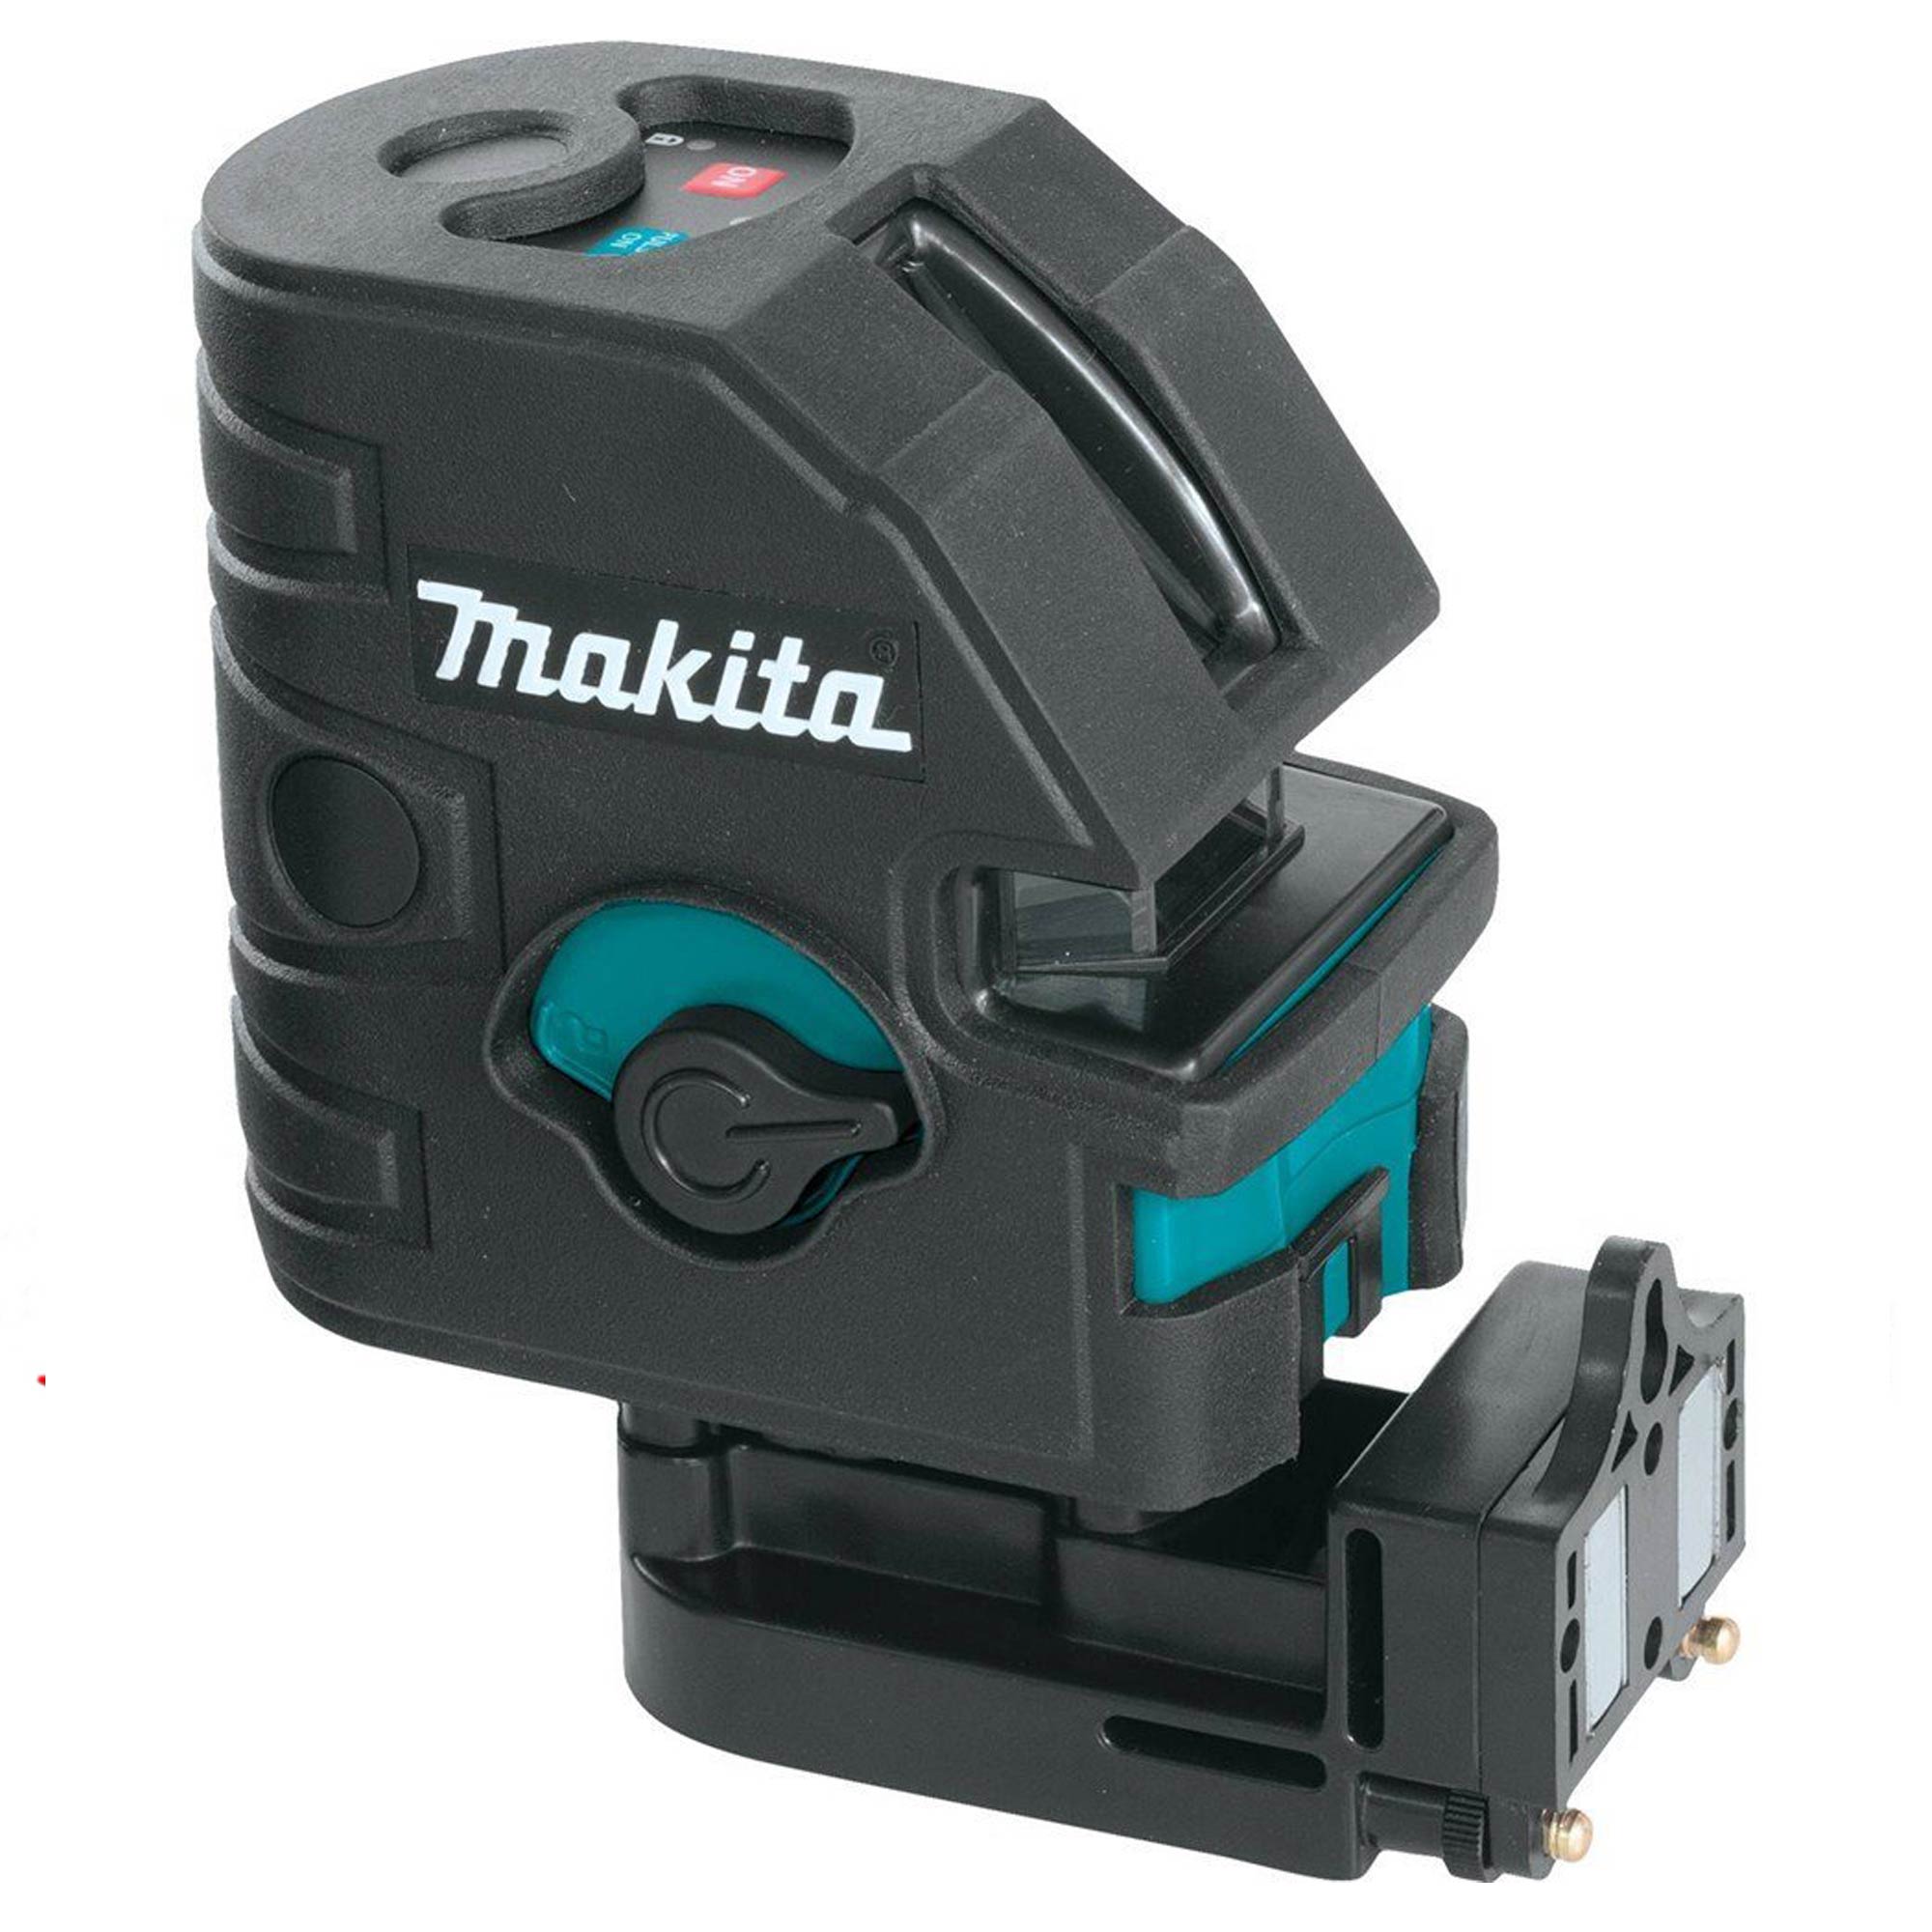 Makita Laser Level Spares and Parts